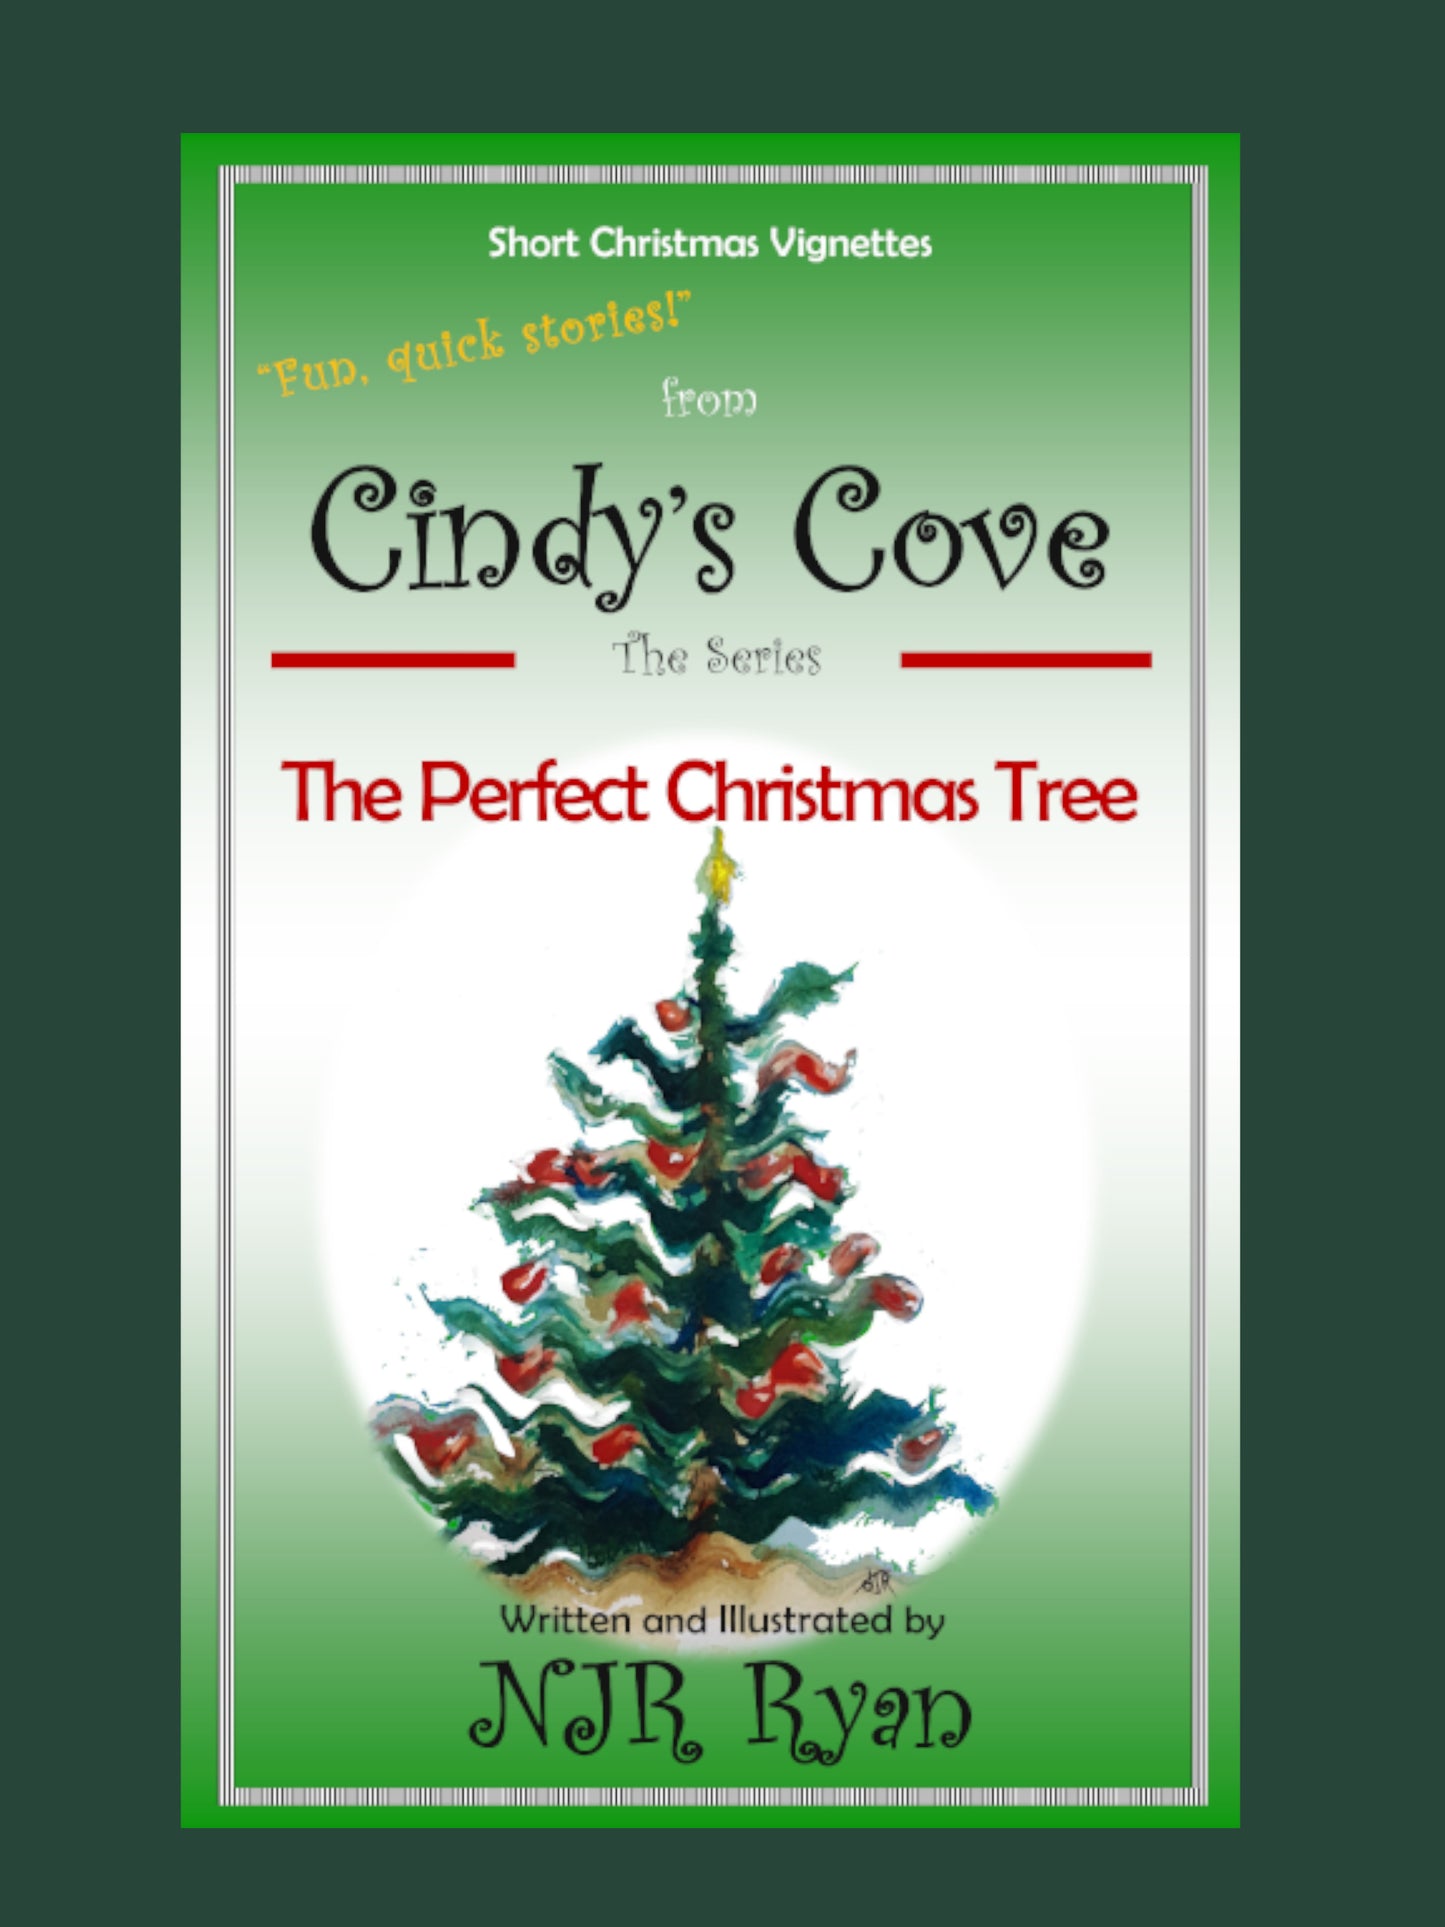 The Perfect Christmas Tree – One tree and so much trouble!